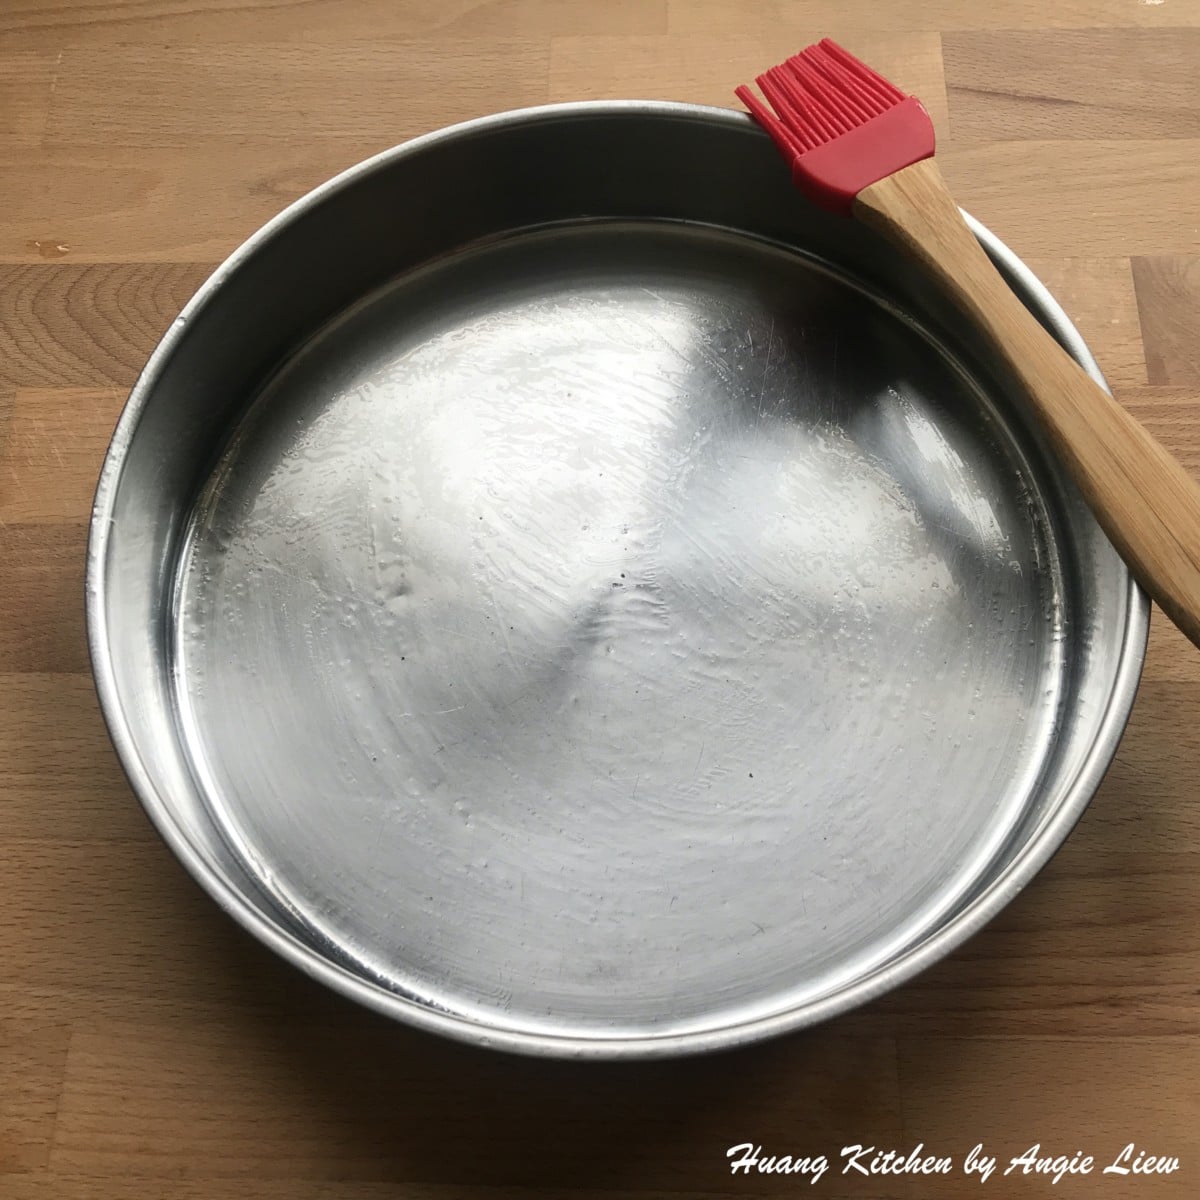 Brush a 10 inch cake pan with cooking oil.